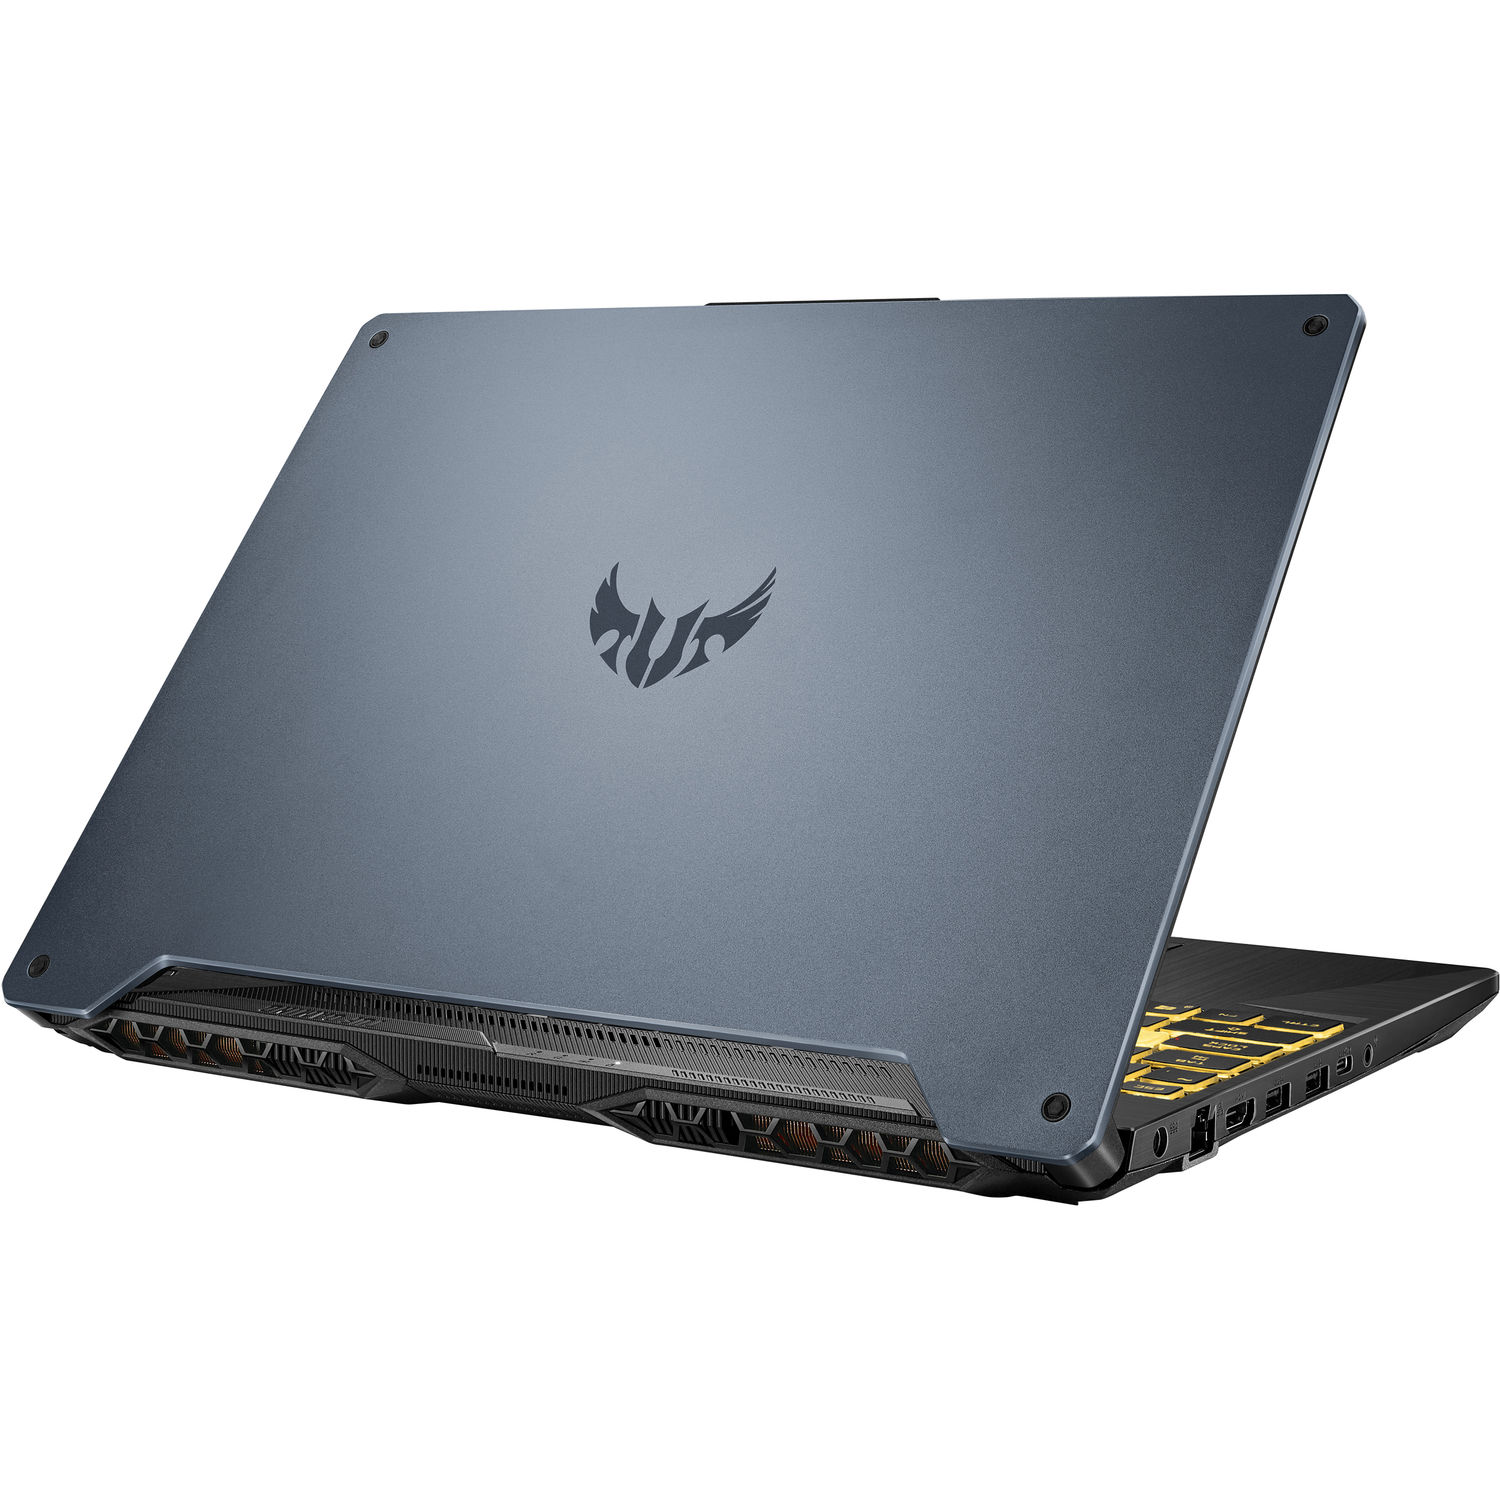 ASUS TUF A15 Gaming and Entertainment Laptop (AMD Ryzen 7 4800H 8-Core, 8GB RAM, 2TB HDD, 15.6" Full HD (1920x1080), NVIDIA GTX 1650 Ti, Wifi, Bluetooth, Webcam, 1xHDMI, Backlit Keyboard, Win 10 Pro) - image 4 of 6